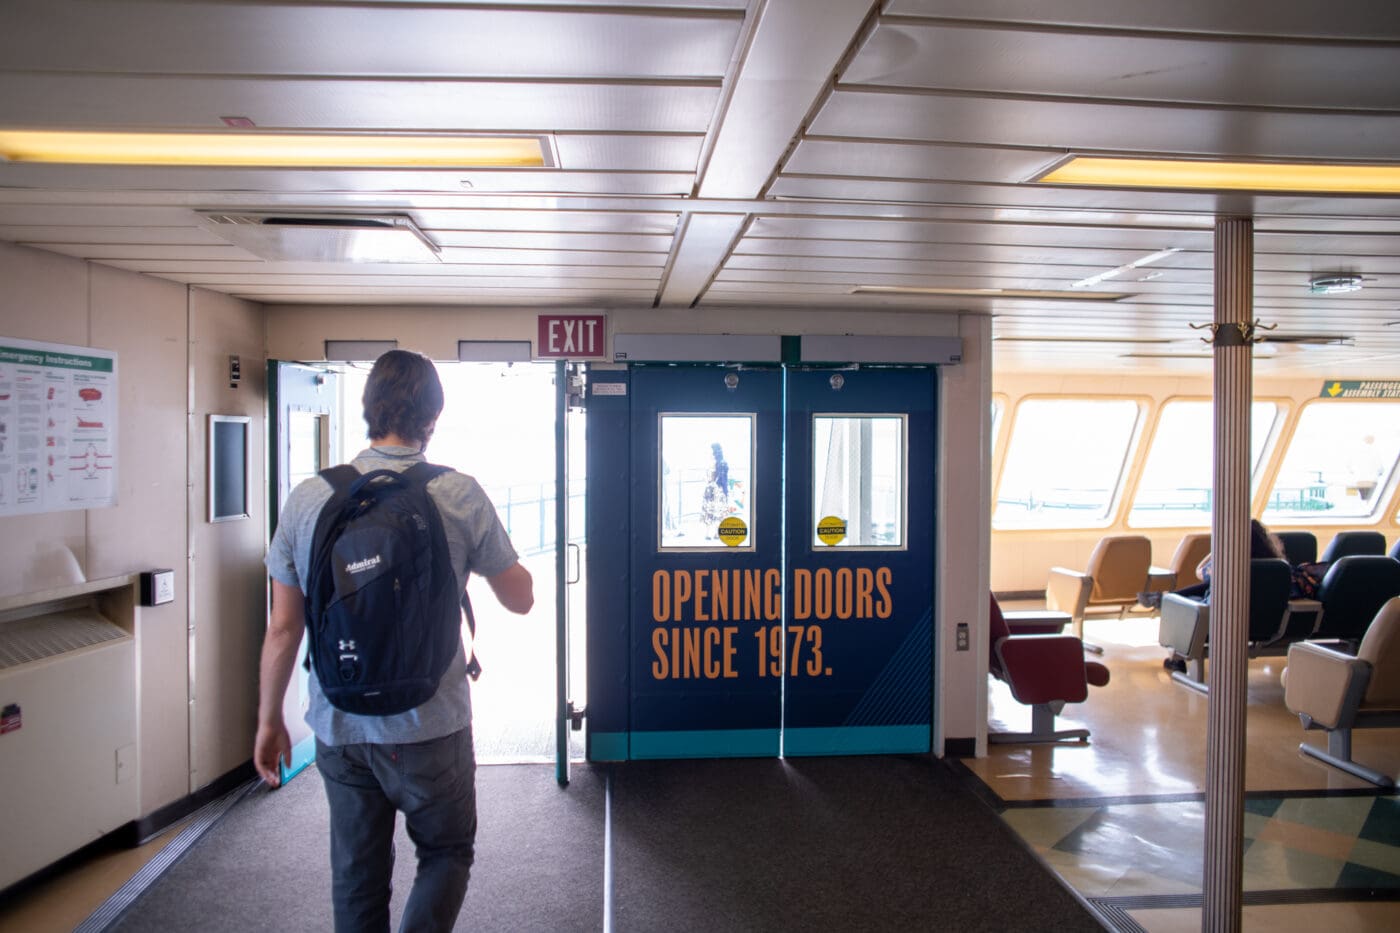 City University of Seattle outdoor advertising campaign utilizing the Washington State Ferry entry/exit doors in Seattle